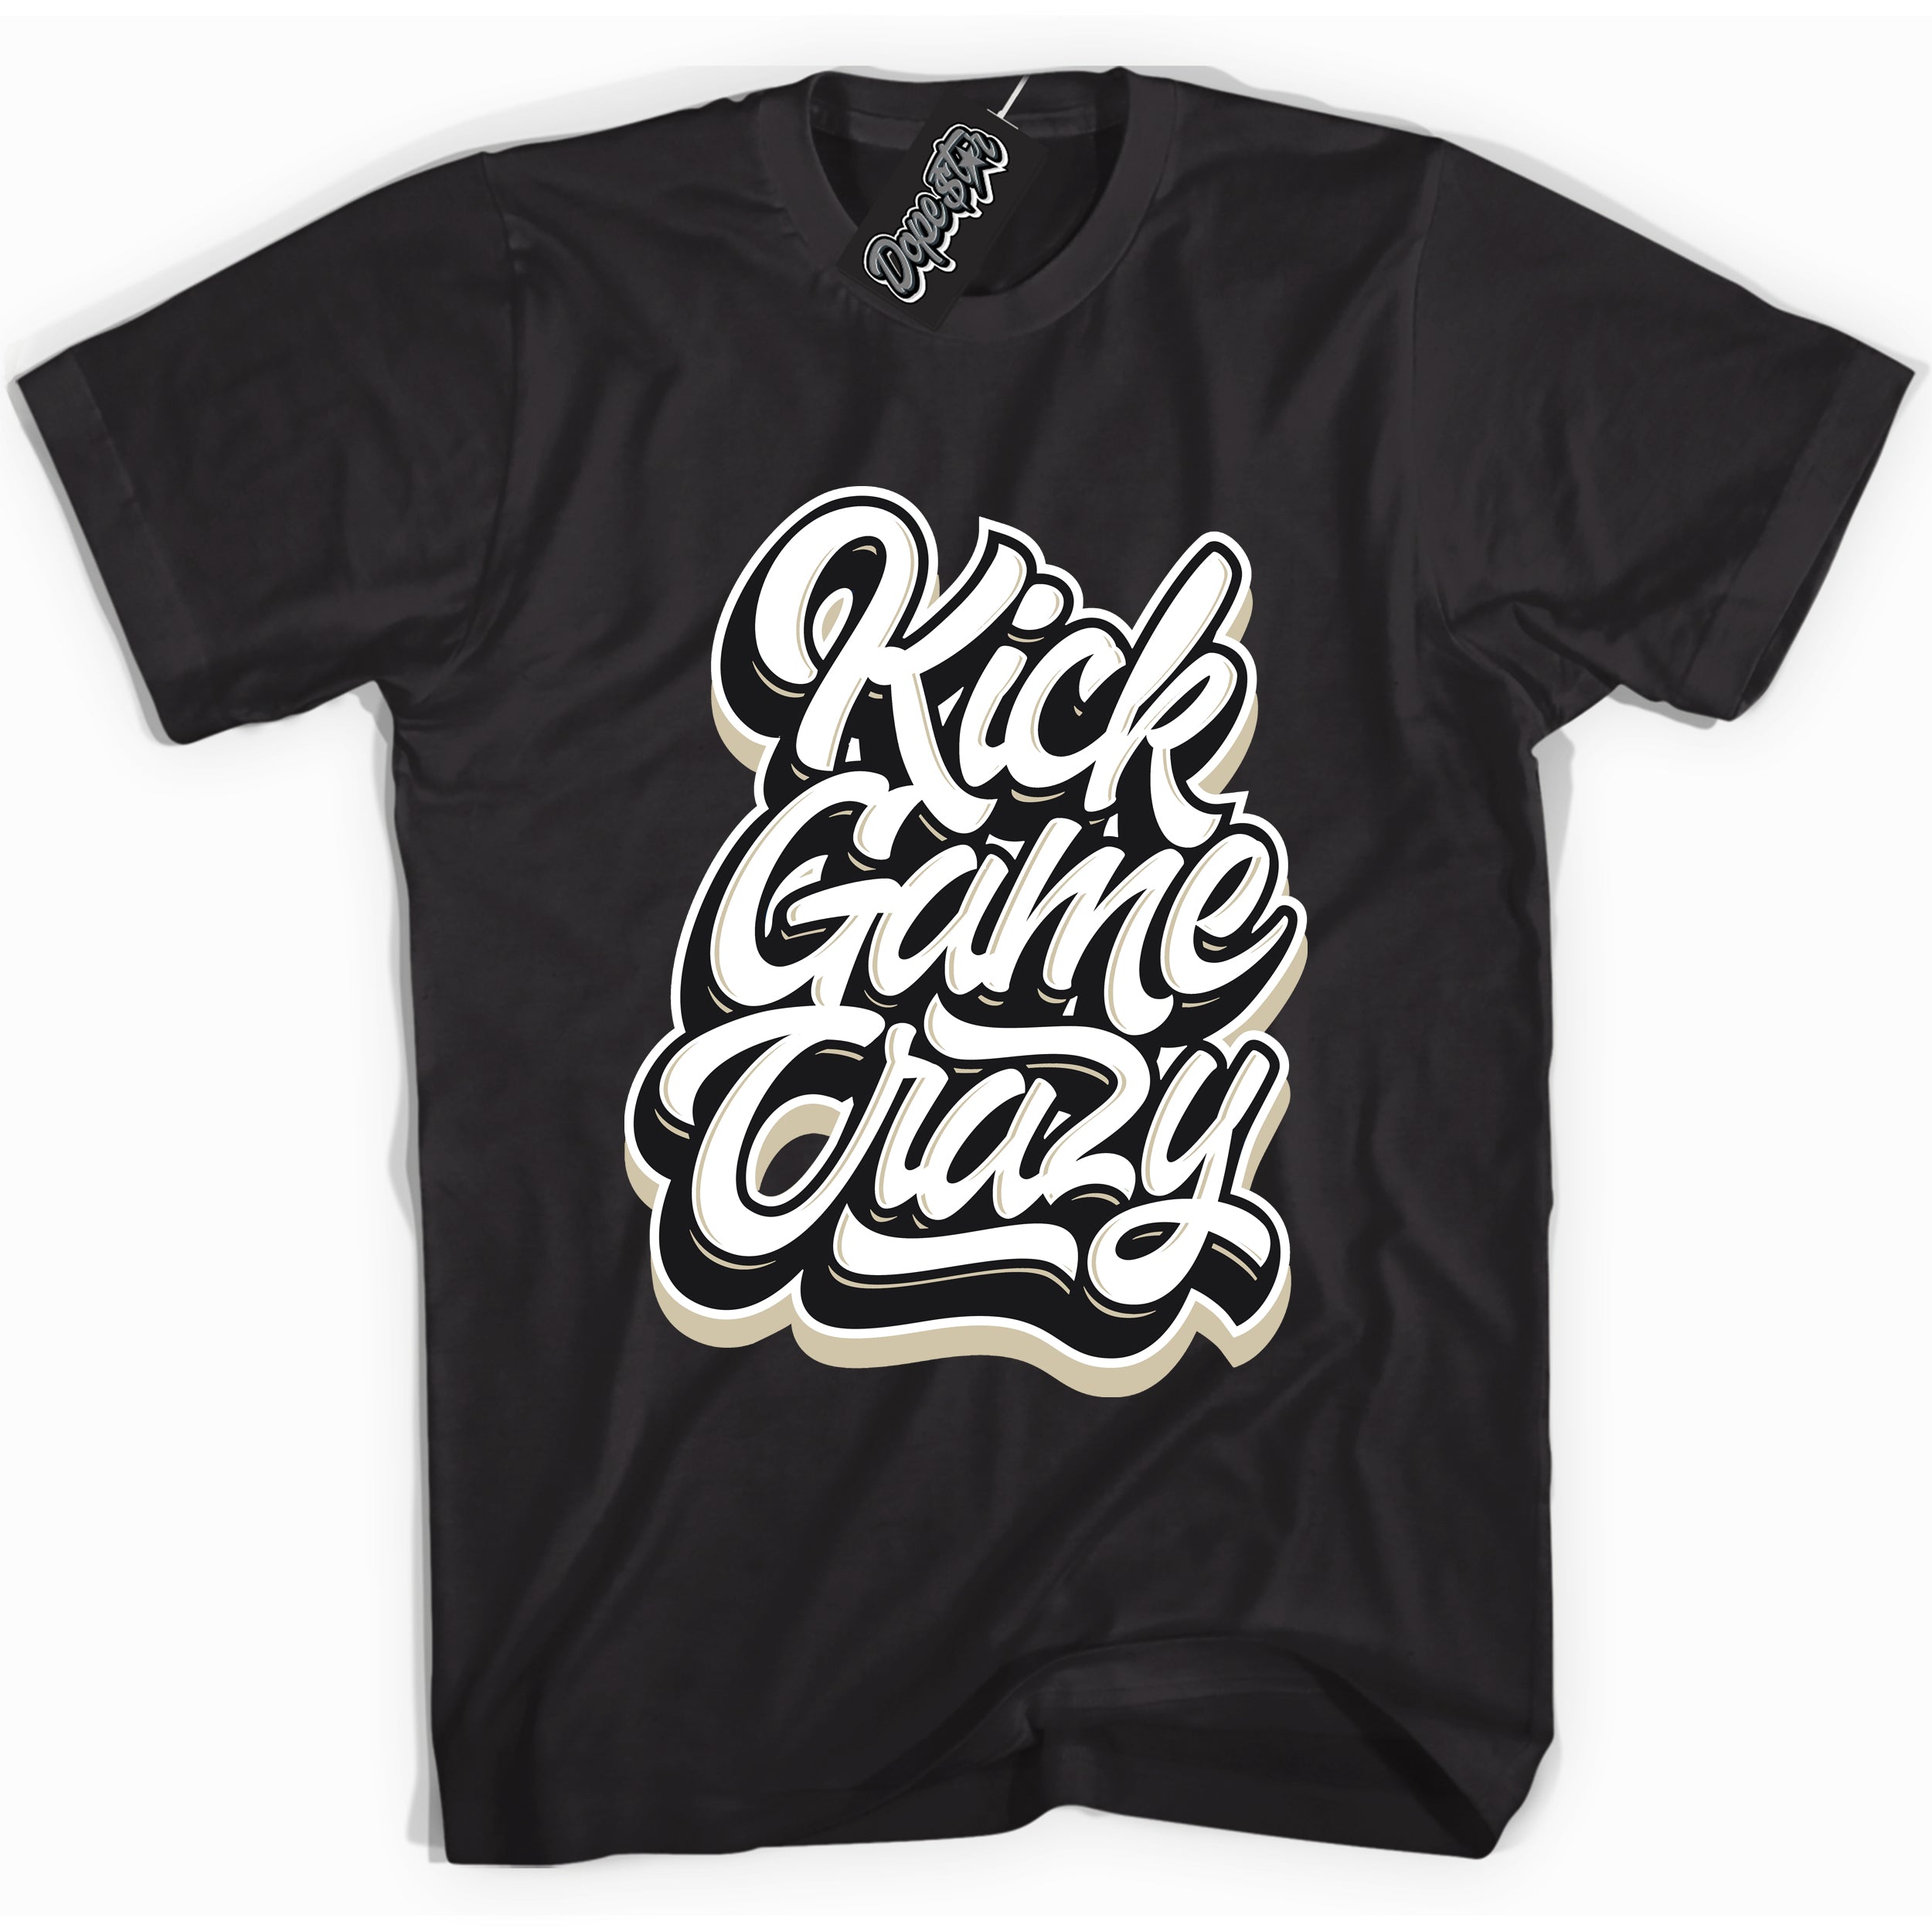 Cool Black graphic tee with “ Kick Game Crazy  ” print, that perfectly matches GRATITUDE 11s  sneakers 